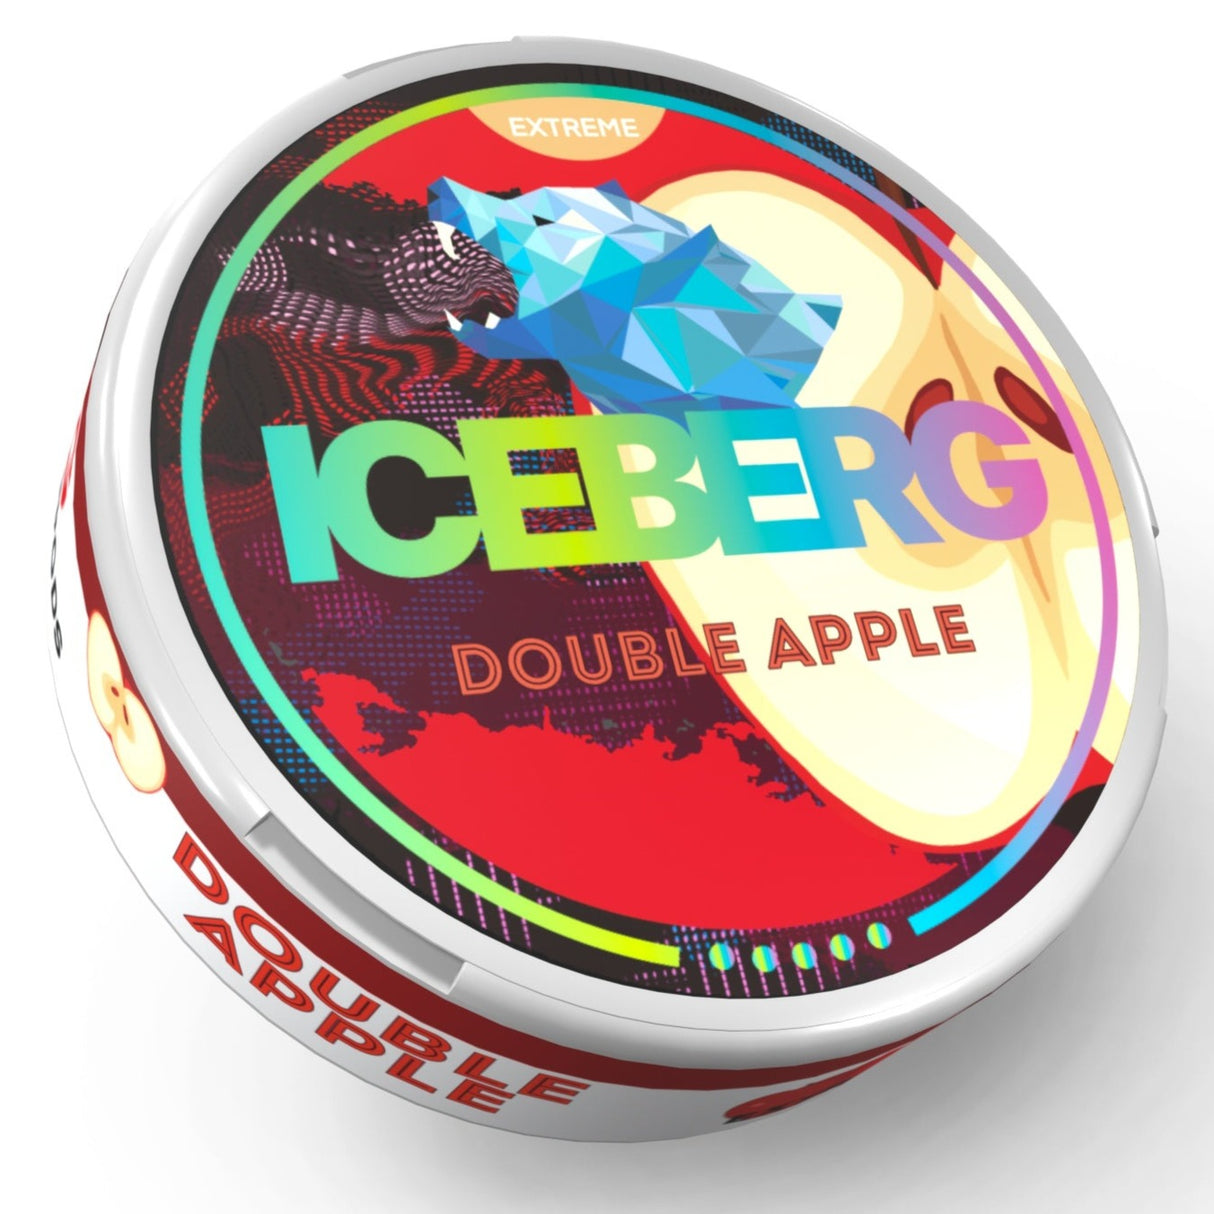 Double Apple Nicotine Pouches By Iceberg